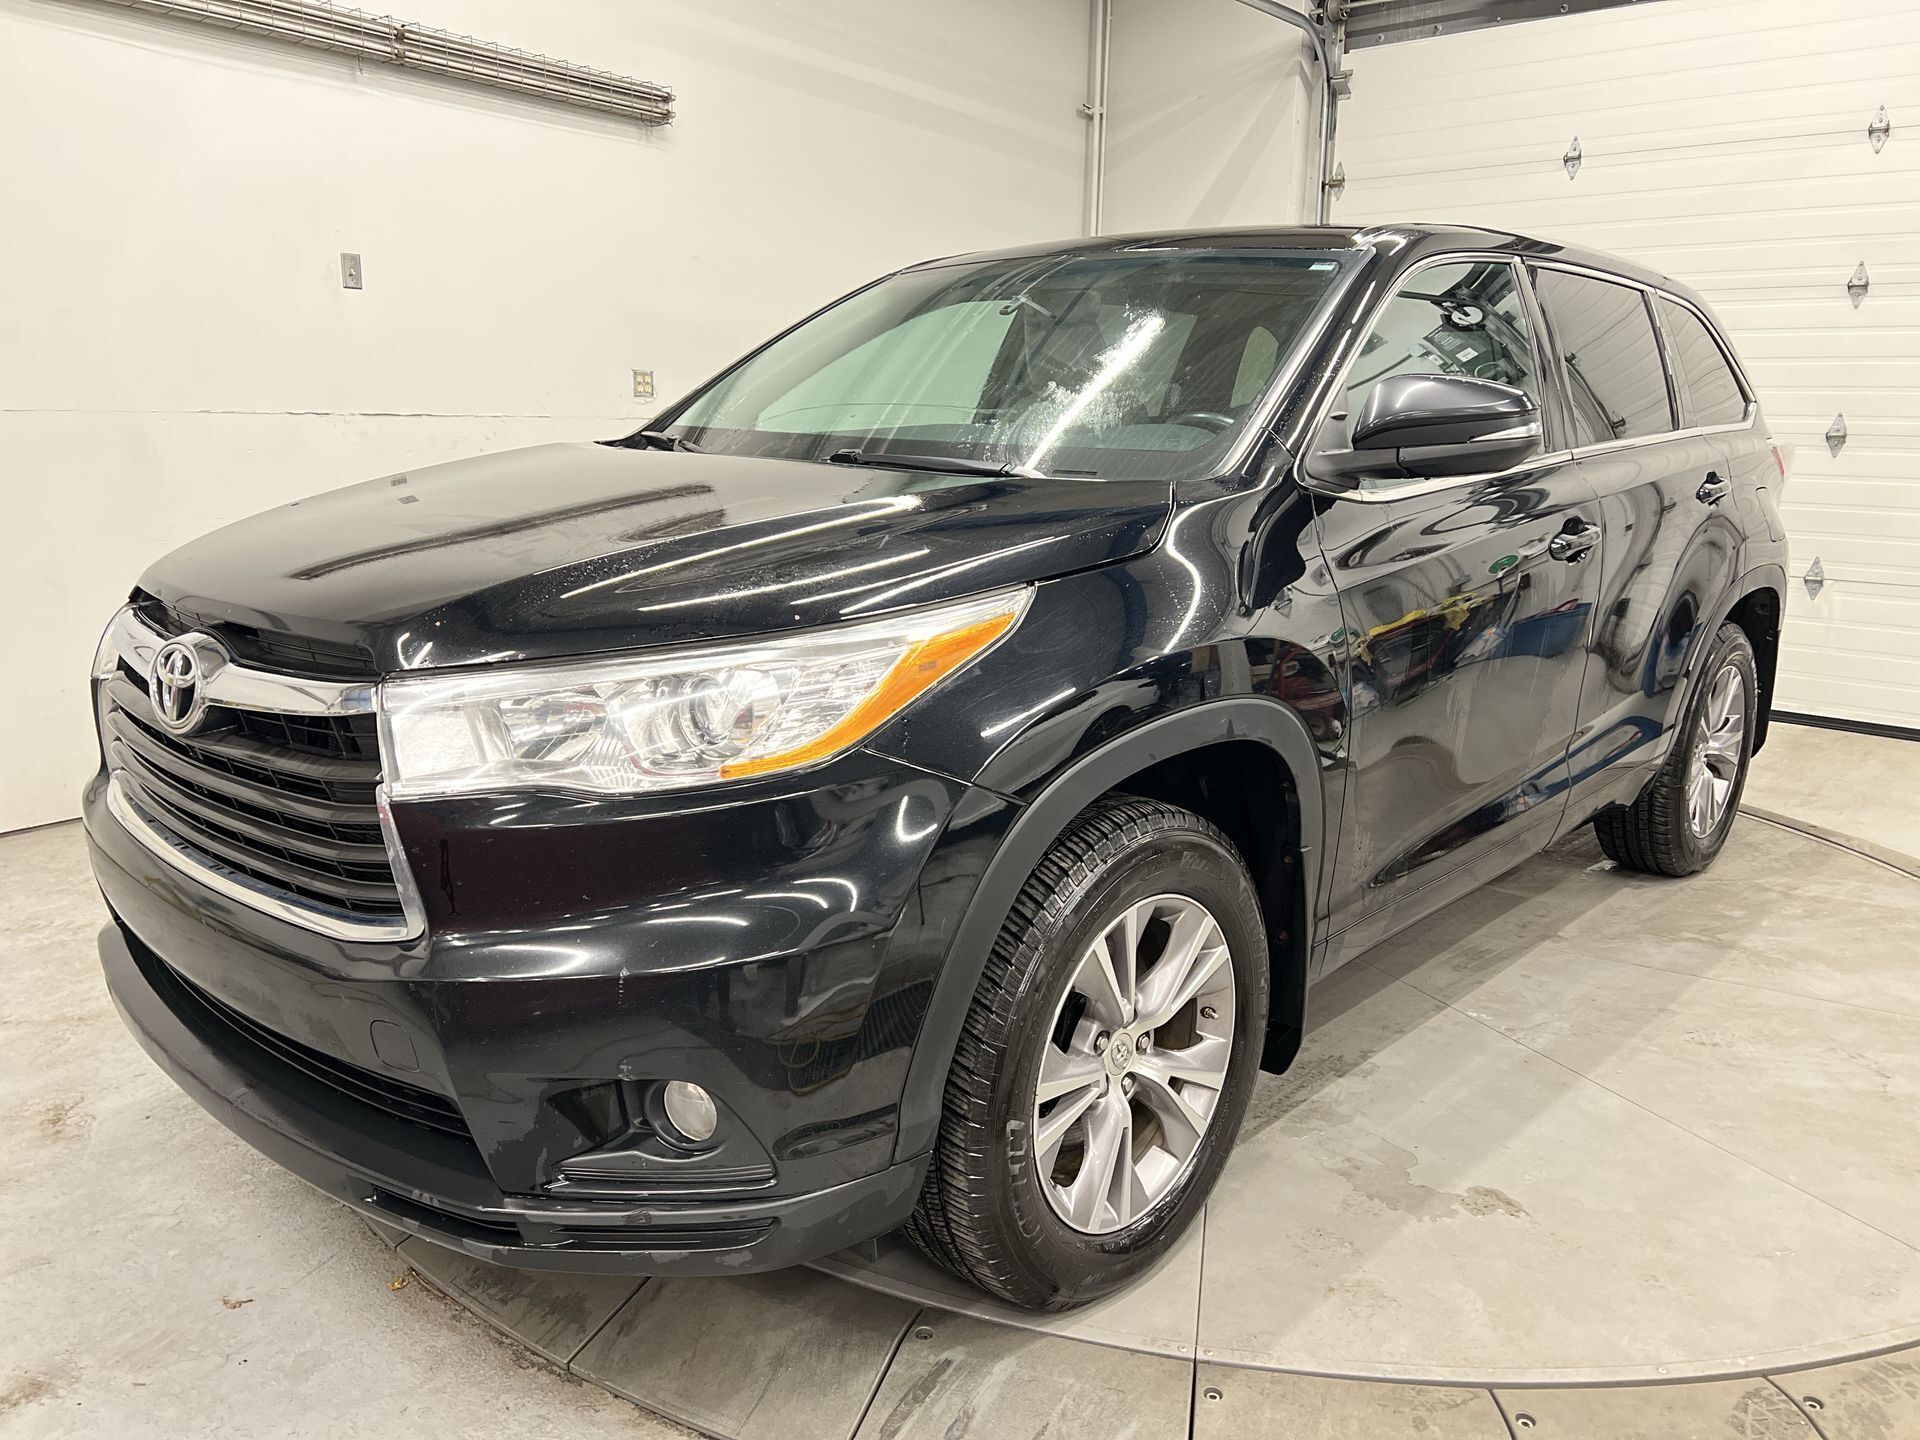 2015 Toyota Highlander AWD| HTD SEATS| REAR CAM | PWR LIFTGATE | LOW KMS!